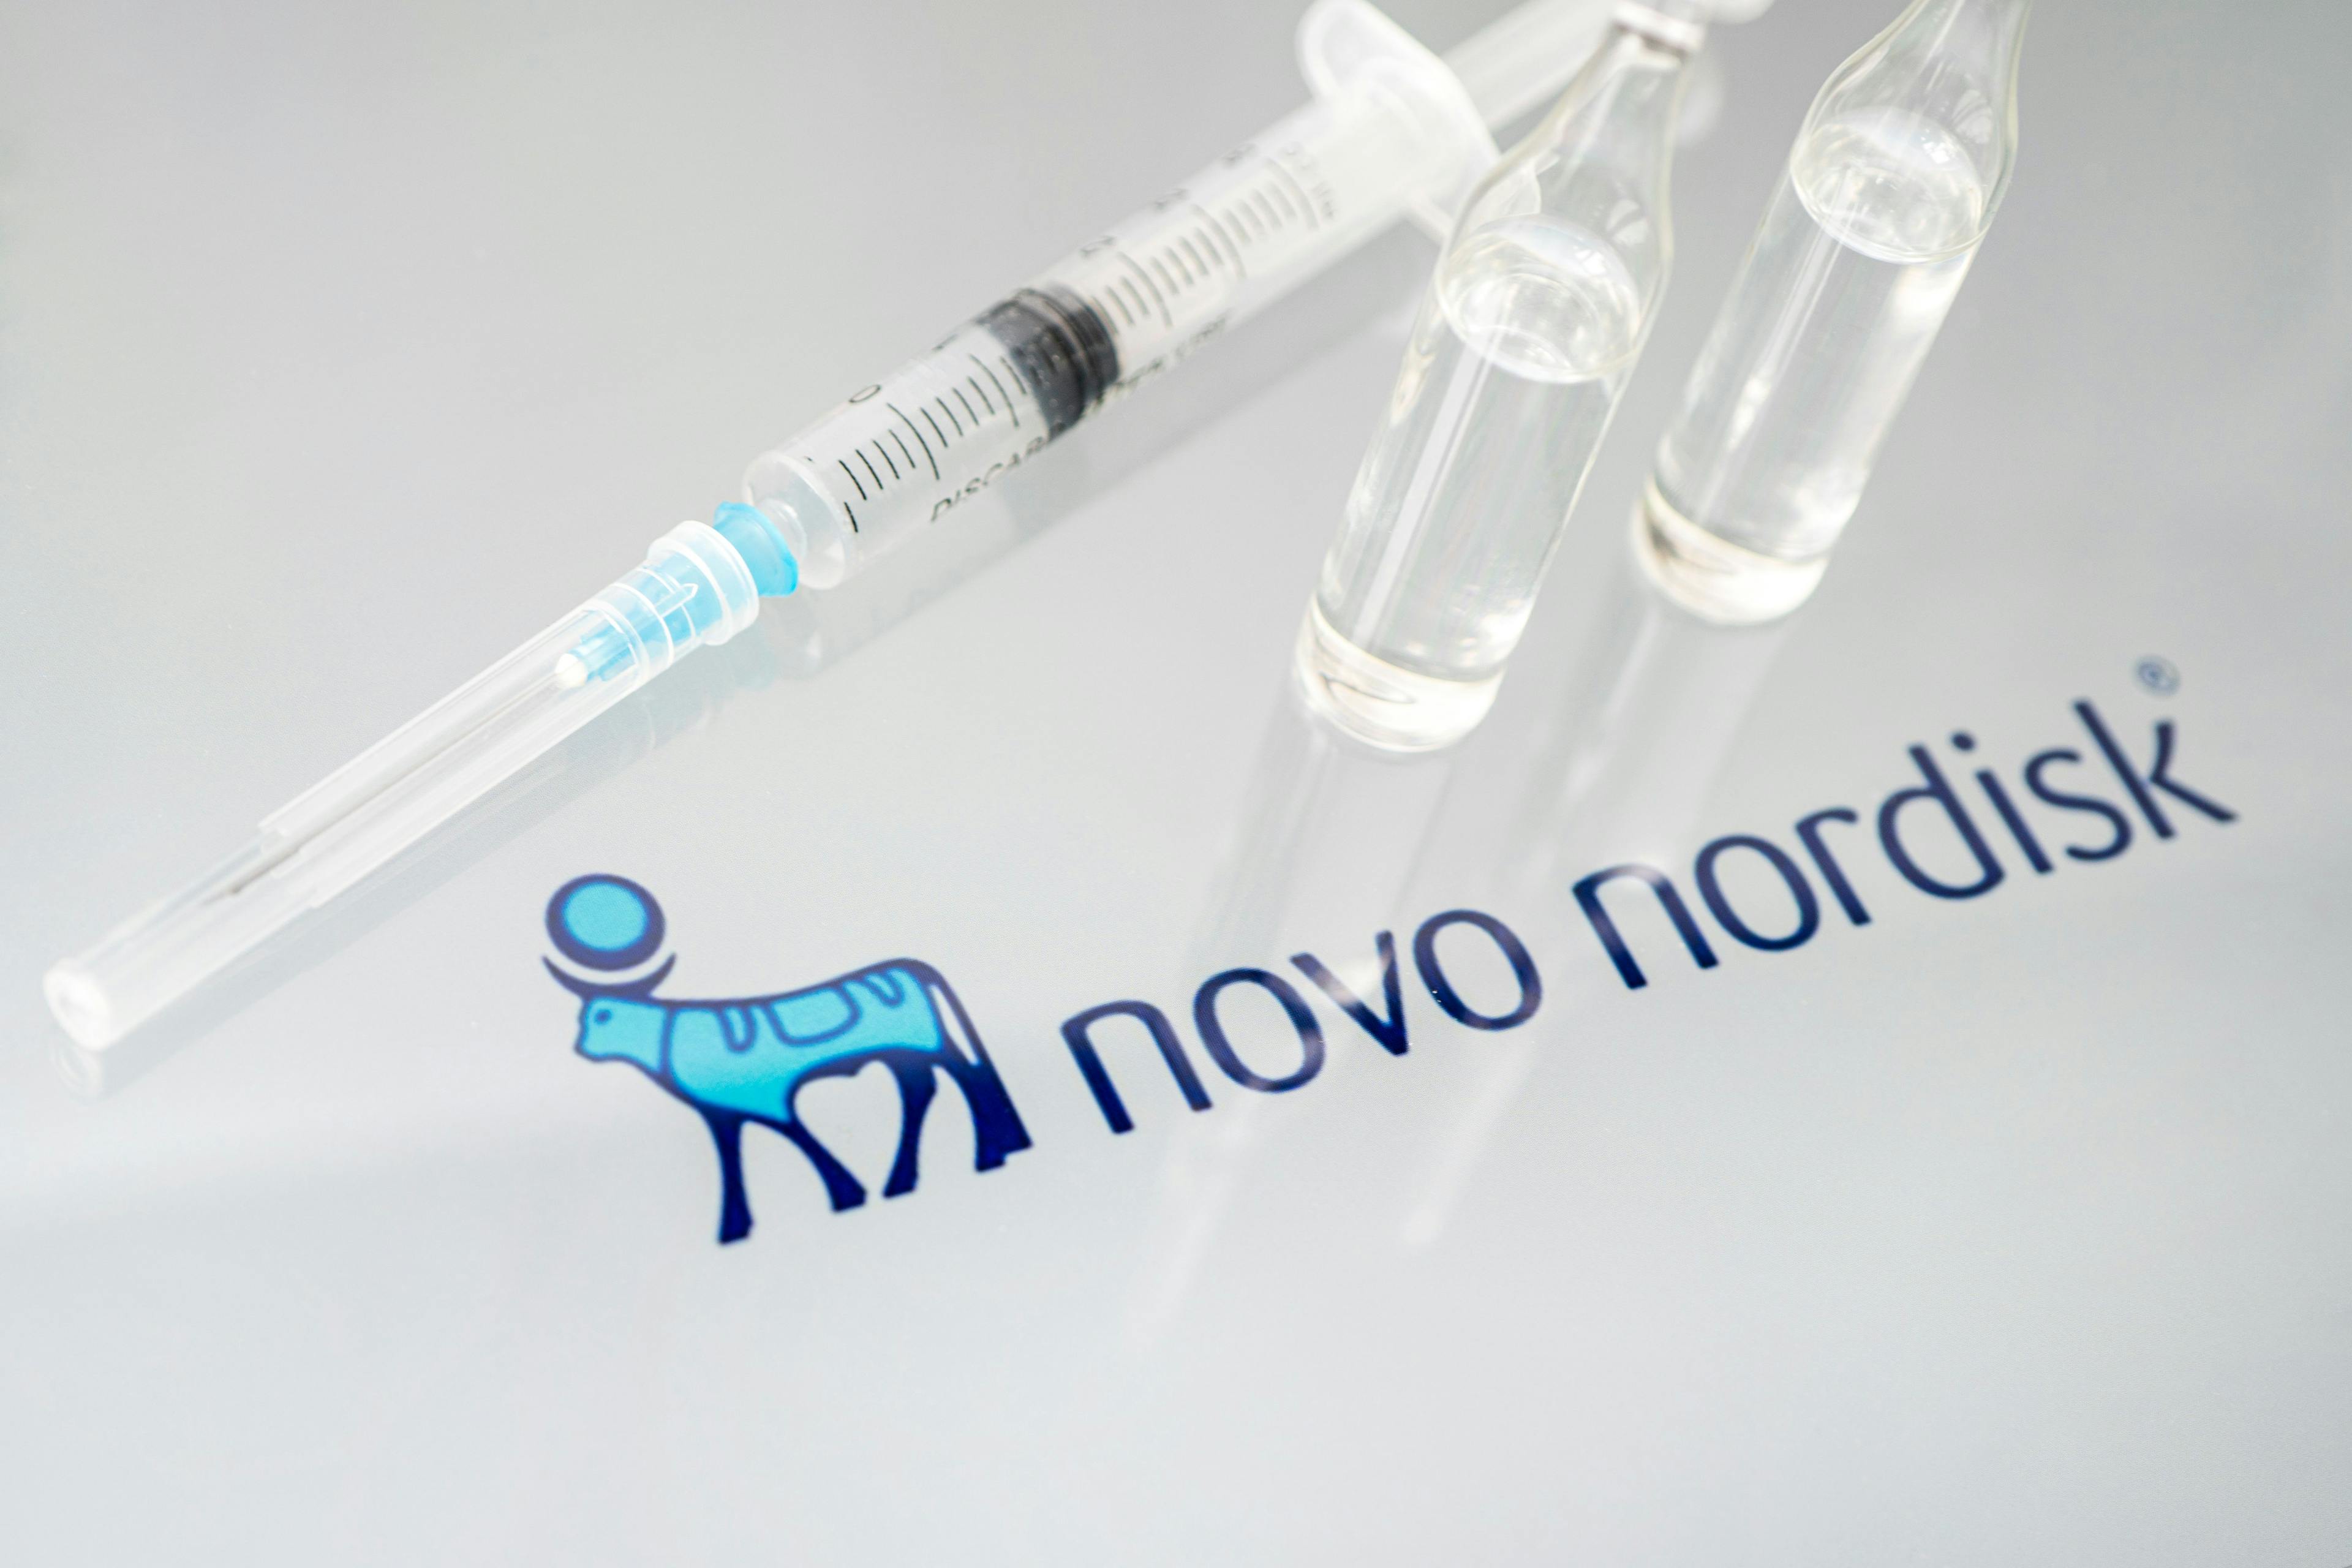 Vials of liquid on a white table and the logo of a large pharmaceutical company | Image credit: diy13 - stock.adobe.com